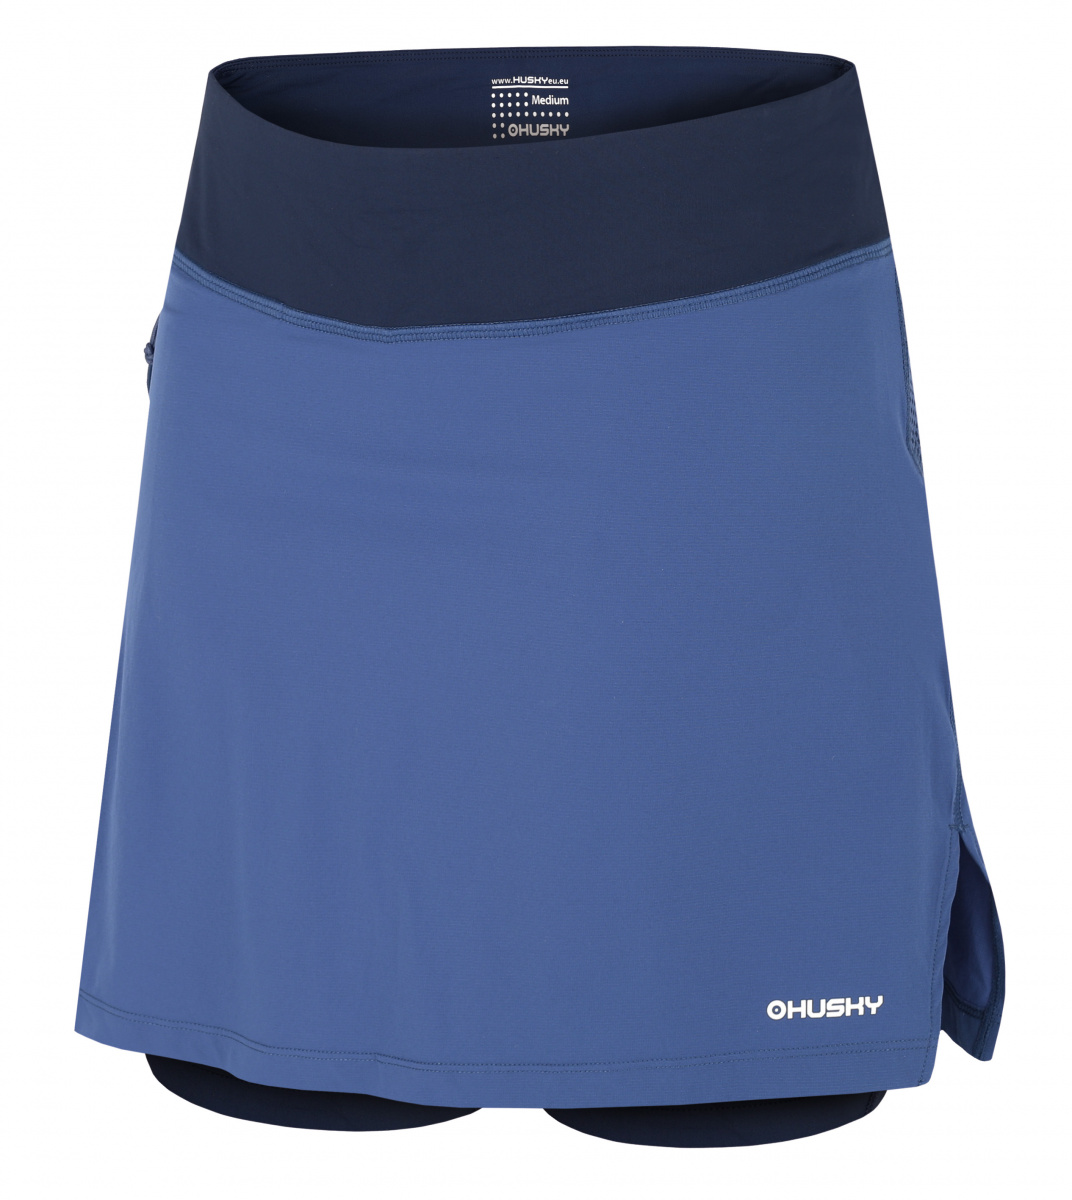 girls athletic shorts for Fitness, Functionality and Style 